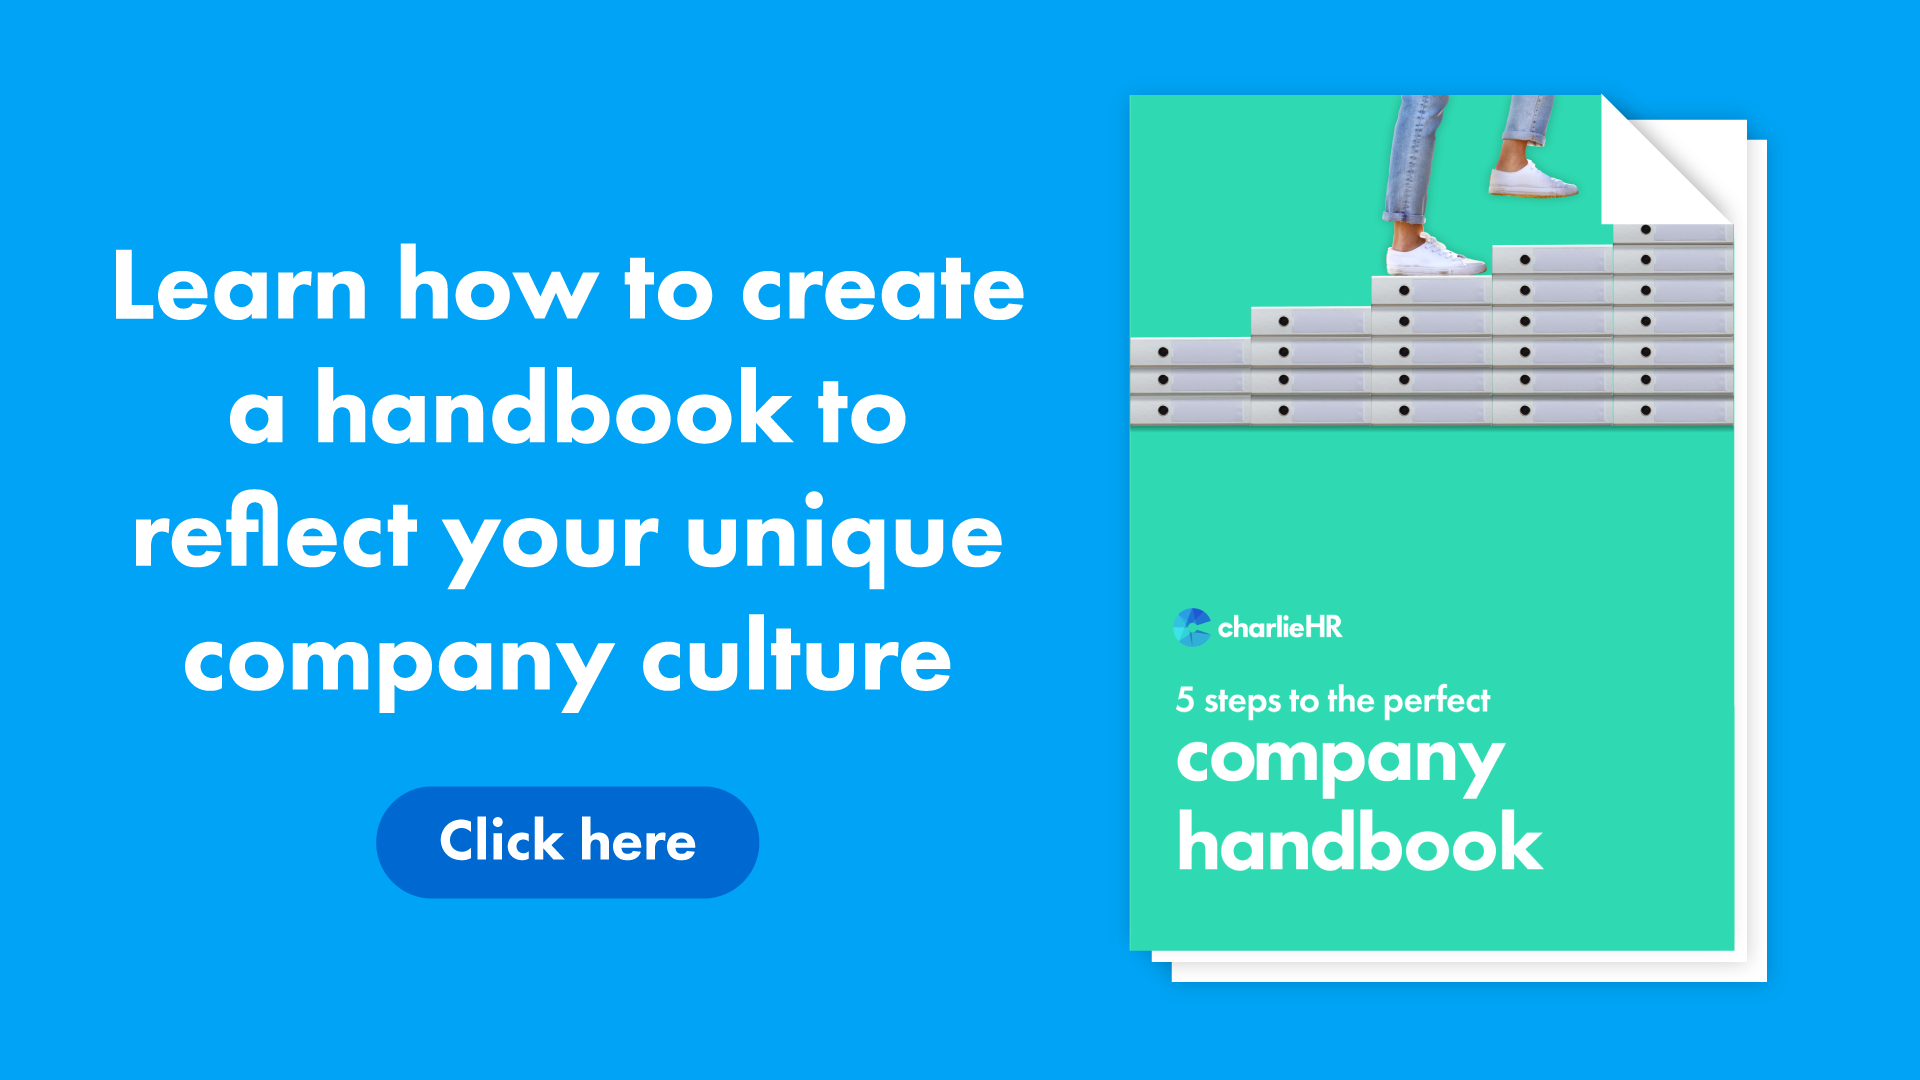 Click here to download our guide to create the perfect company handbook